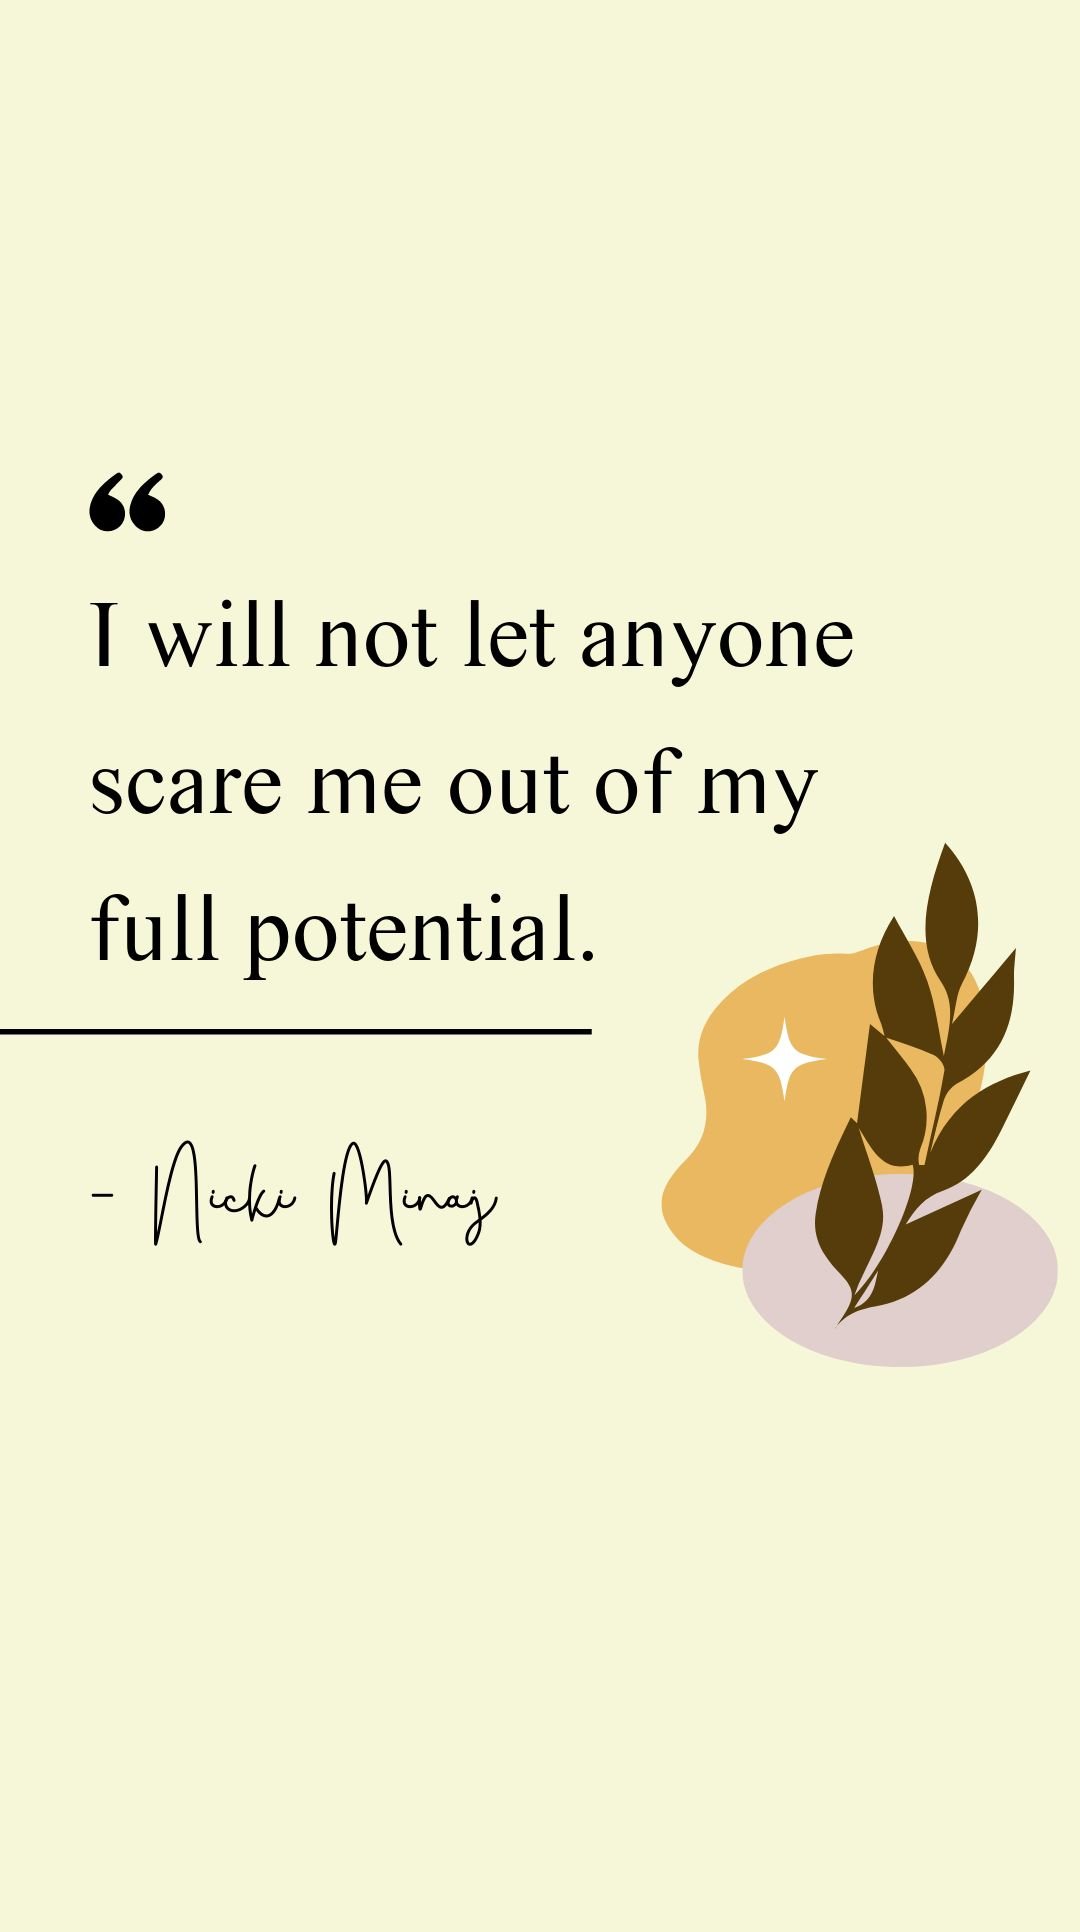 Nicki Minaj - I will not let anyone scare me out of my full potential.